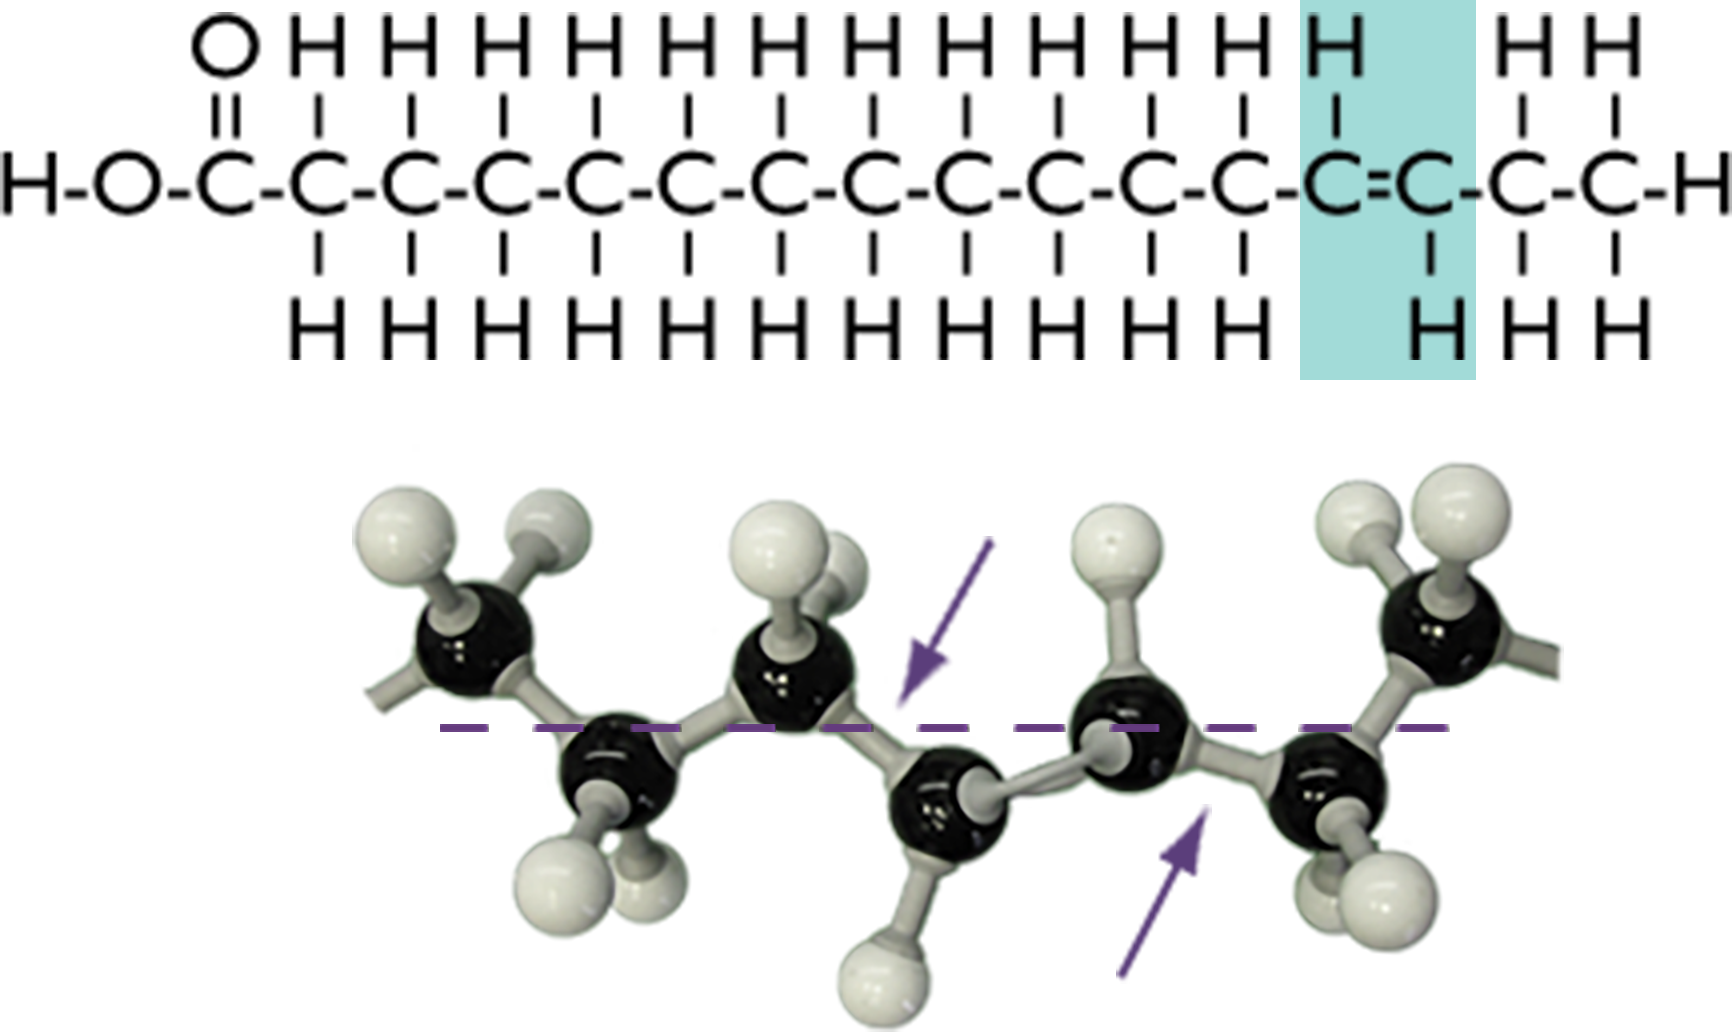 The chemical bonds of trans fatty acid with the carbon-carbon double bonds highlighted plus its molecular structure with a dashed line through the mid-line of the molecule and arrows marking the single carbon-carbon bonds adjacent to double bonds.